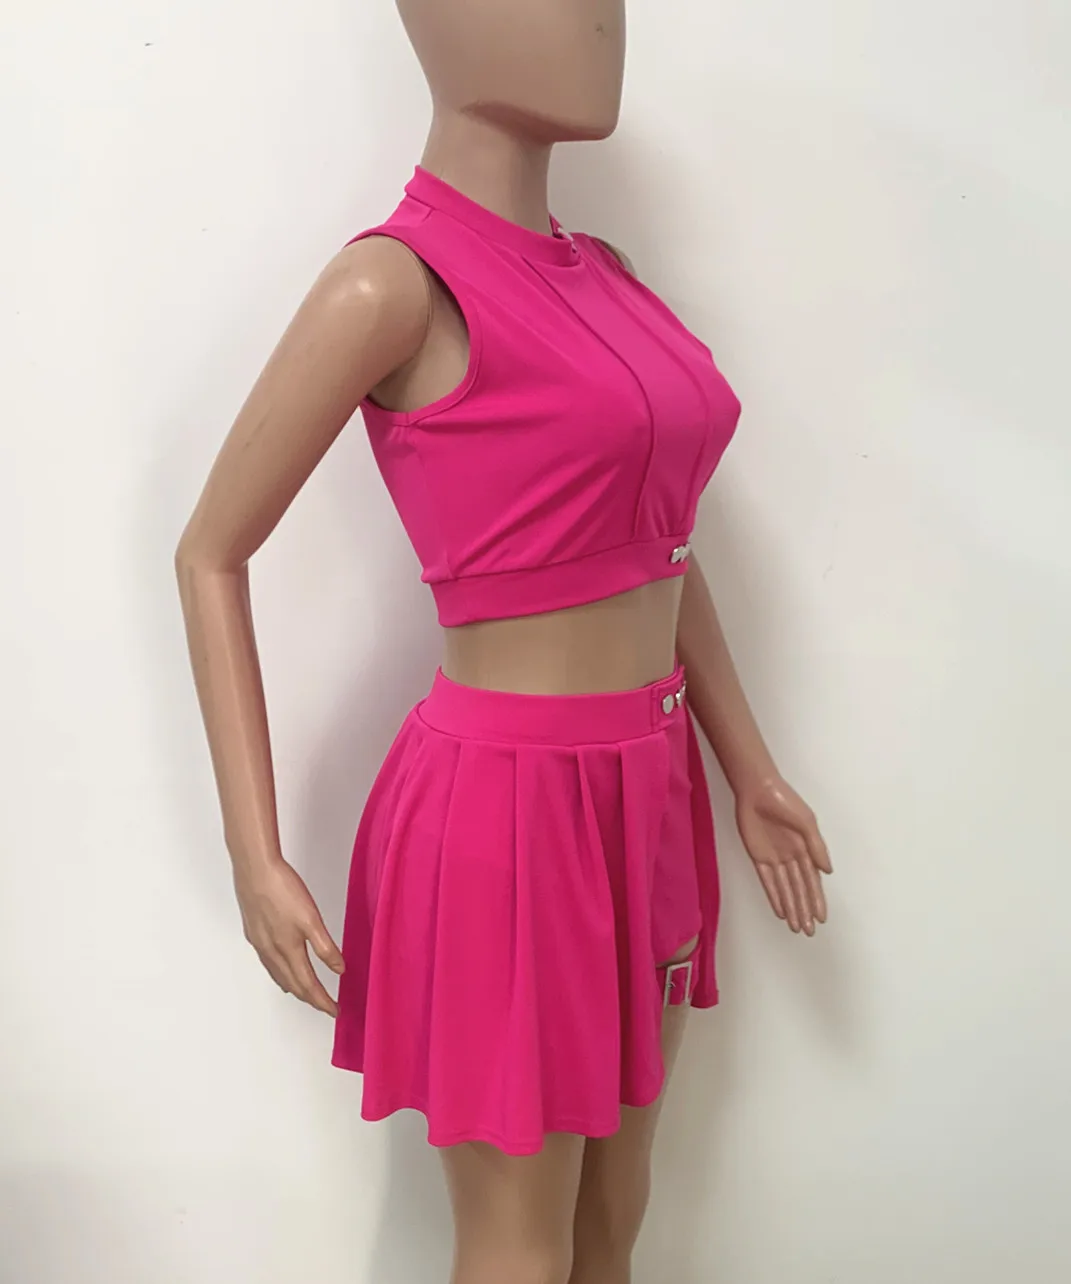 Summer Sleeveless Pleated Skirt Short Sets Women Sleeveless Crop Top and Mini Skirts Sexy Two Piece Sets 2021 Casual Clothings pant suit